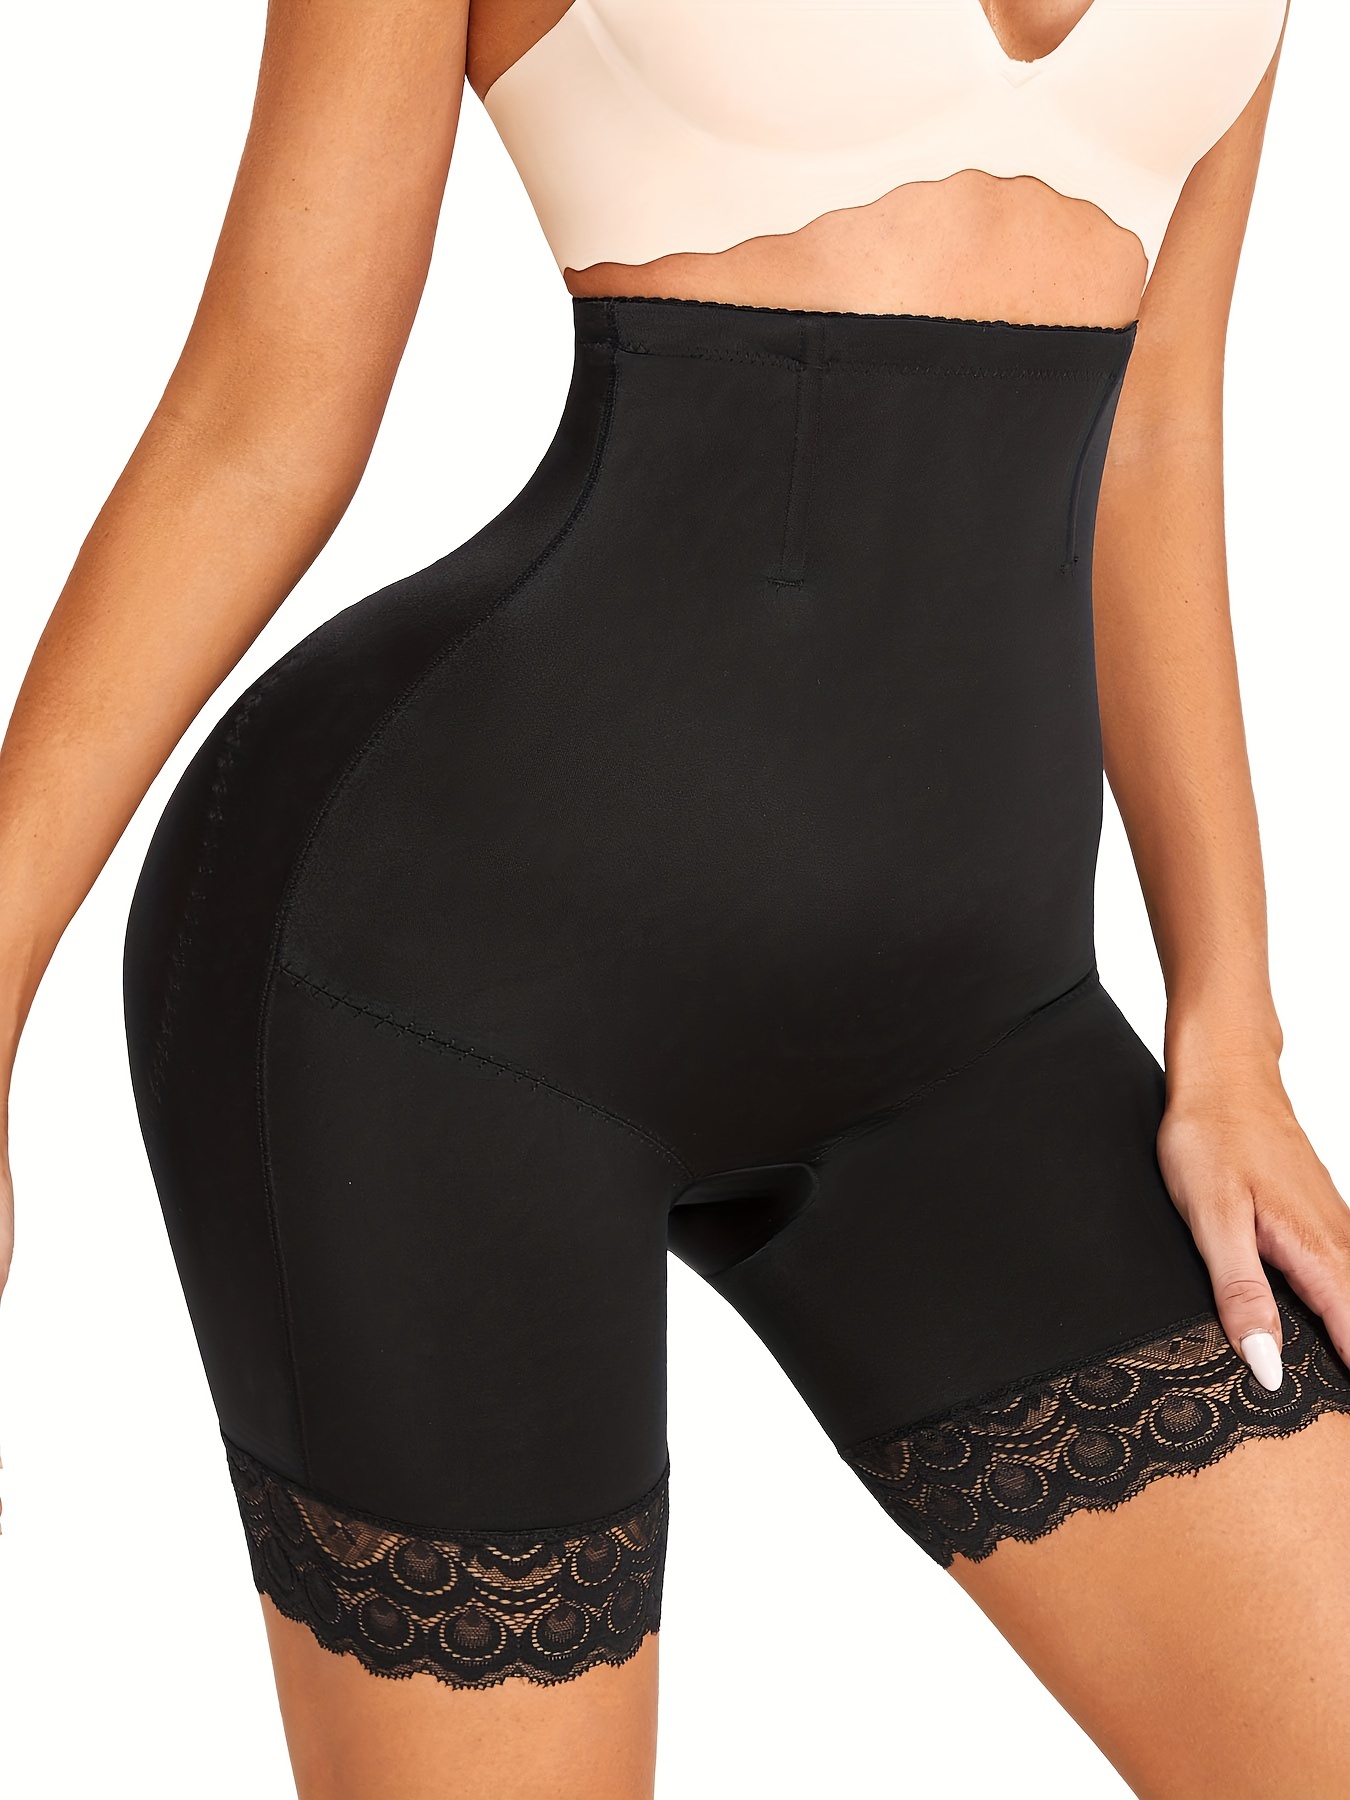 Wholsale Ladies Shapewear Slimming Waist Shorts with Corset for Tummy,  Custom Seamless Girdle Underwear Shorts for Dress and Street Clothing -  China Shorts Shapewear and Shorts with Corset price